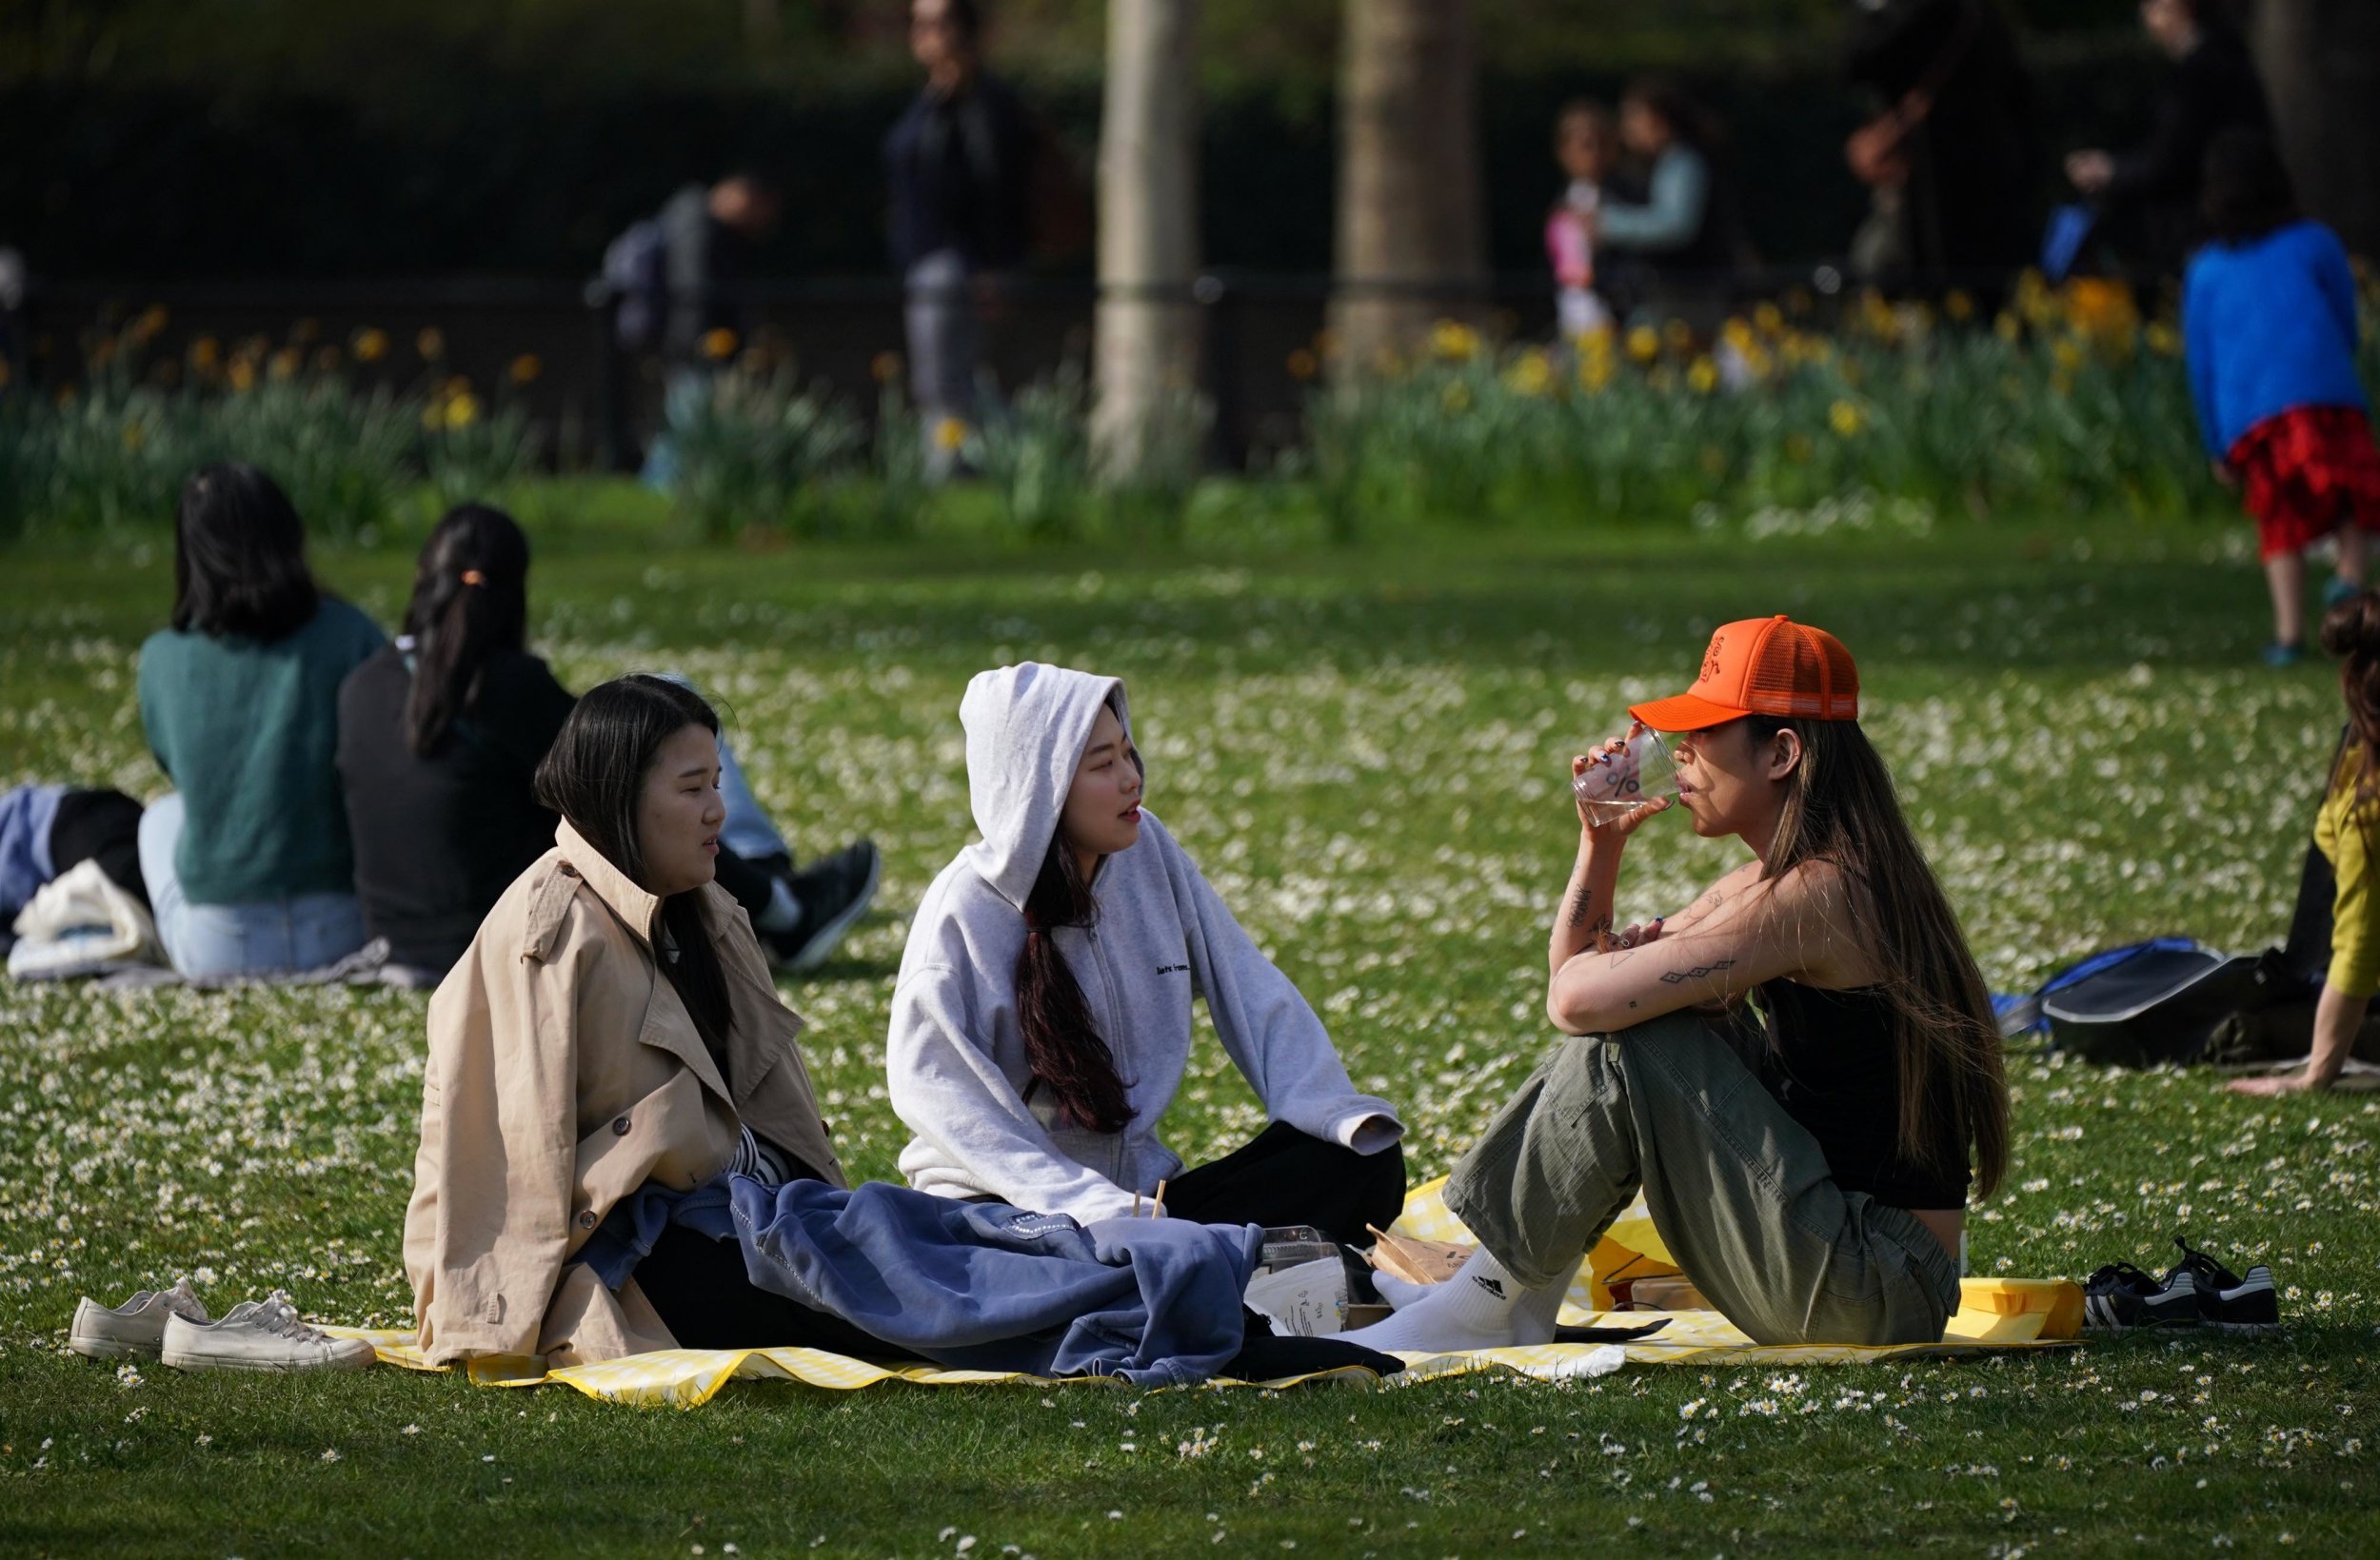 sunshine returns to uk as temperatures may reach 20°c in parts of the country